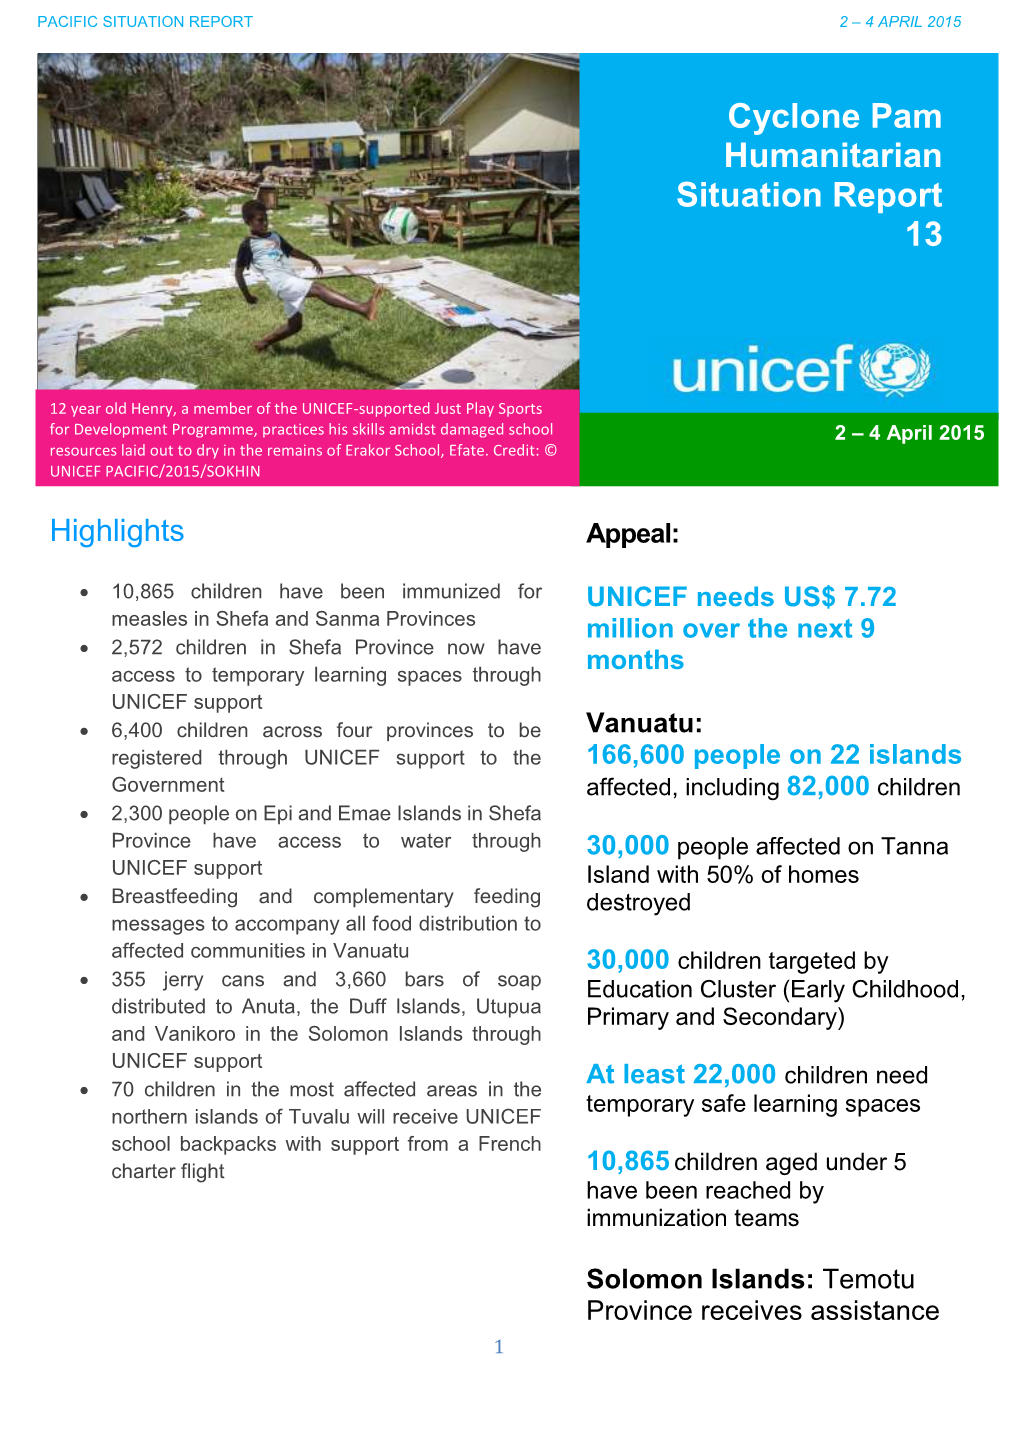 Sitrep 13 UNICEF Pacific Cyclone Pam 2